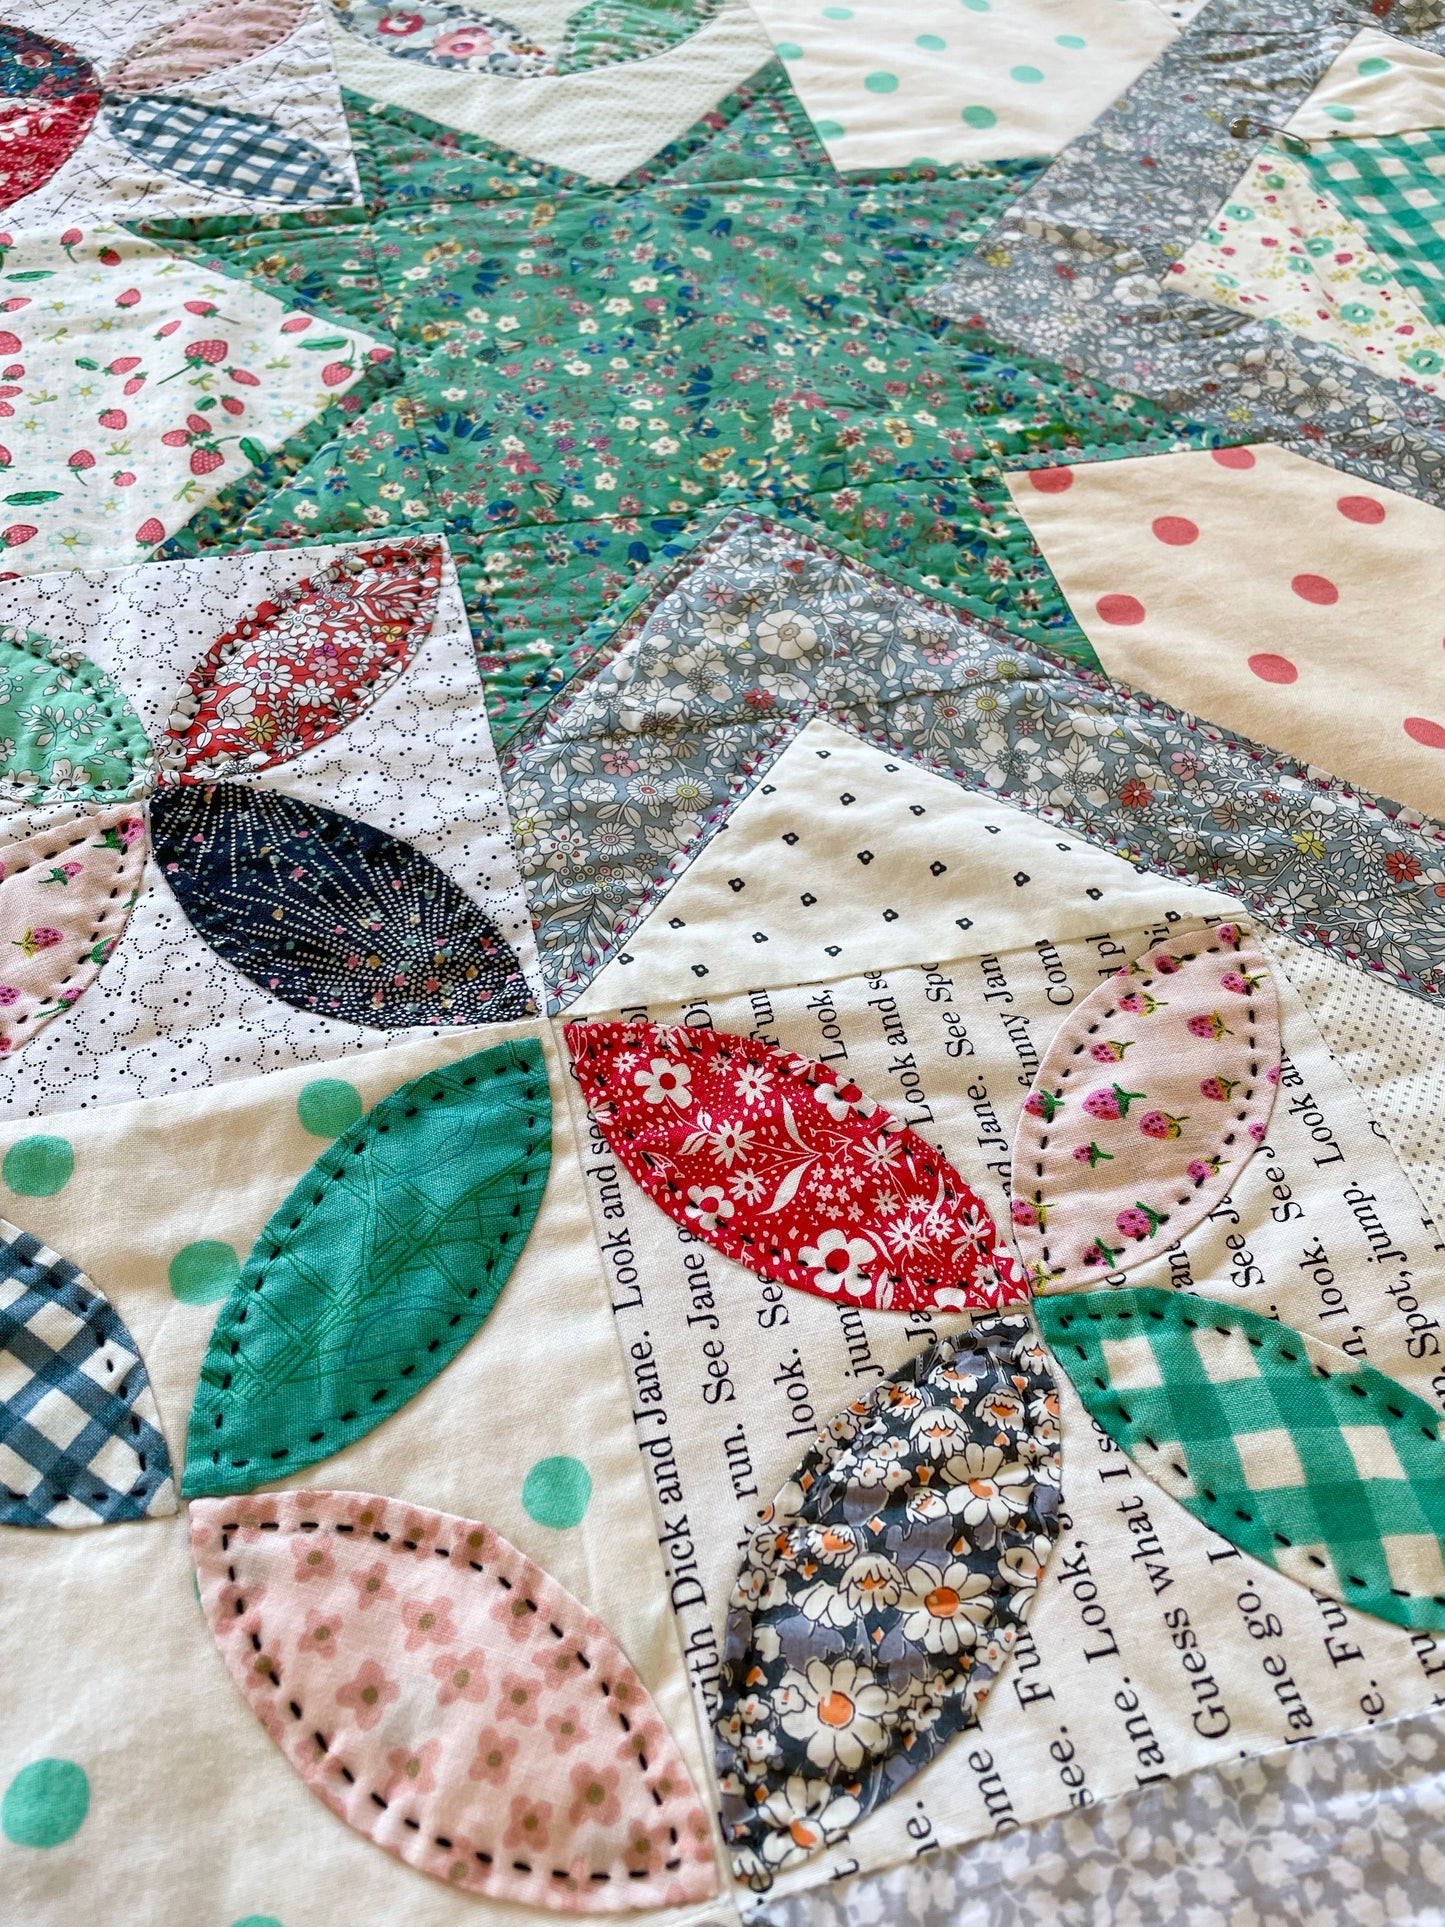 Scrambled Starshine Quilt (Hard Copy Booklet - A5)